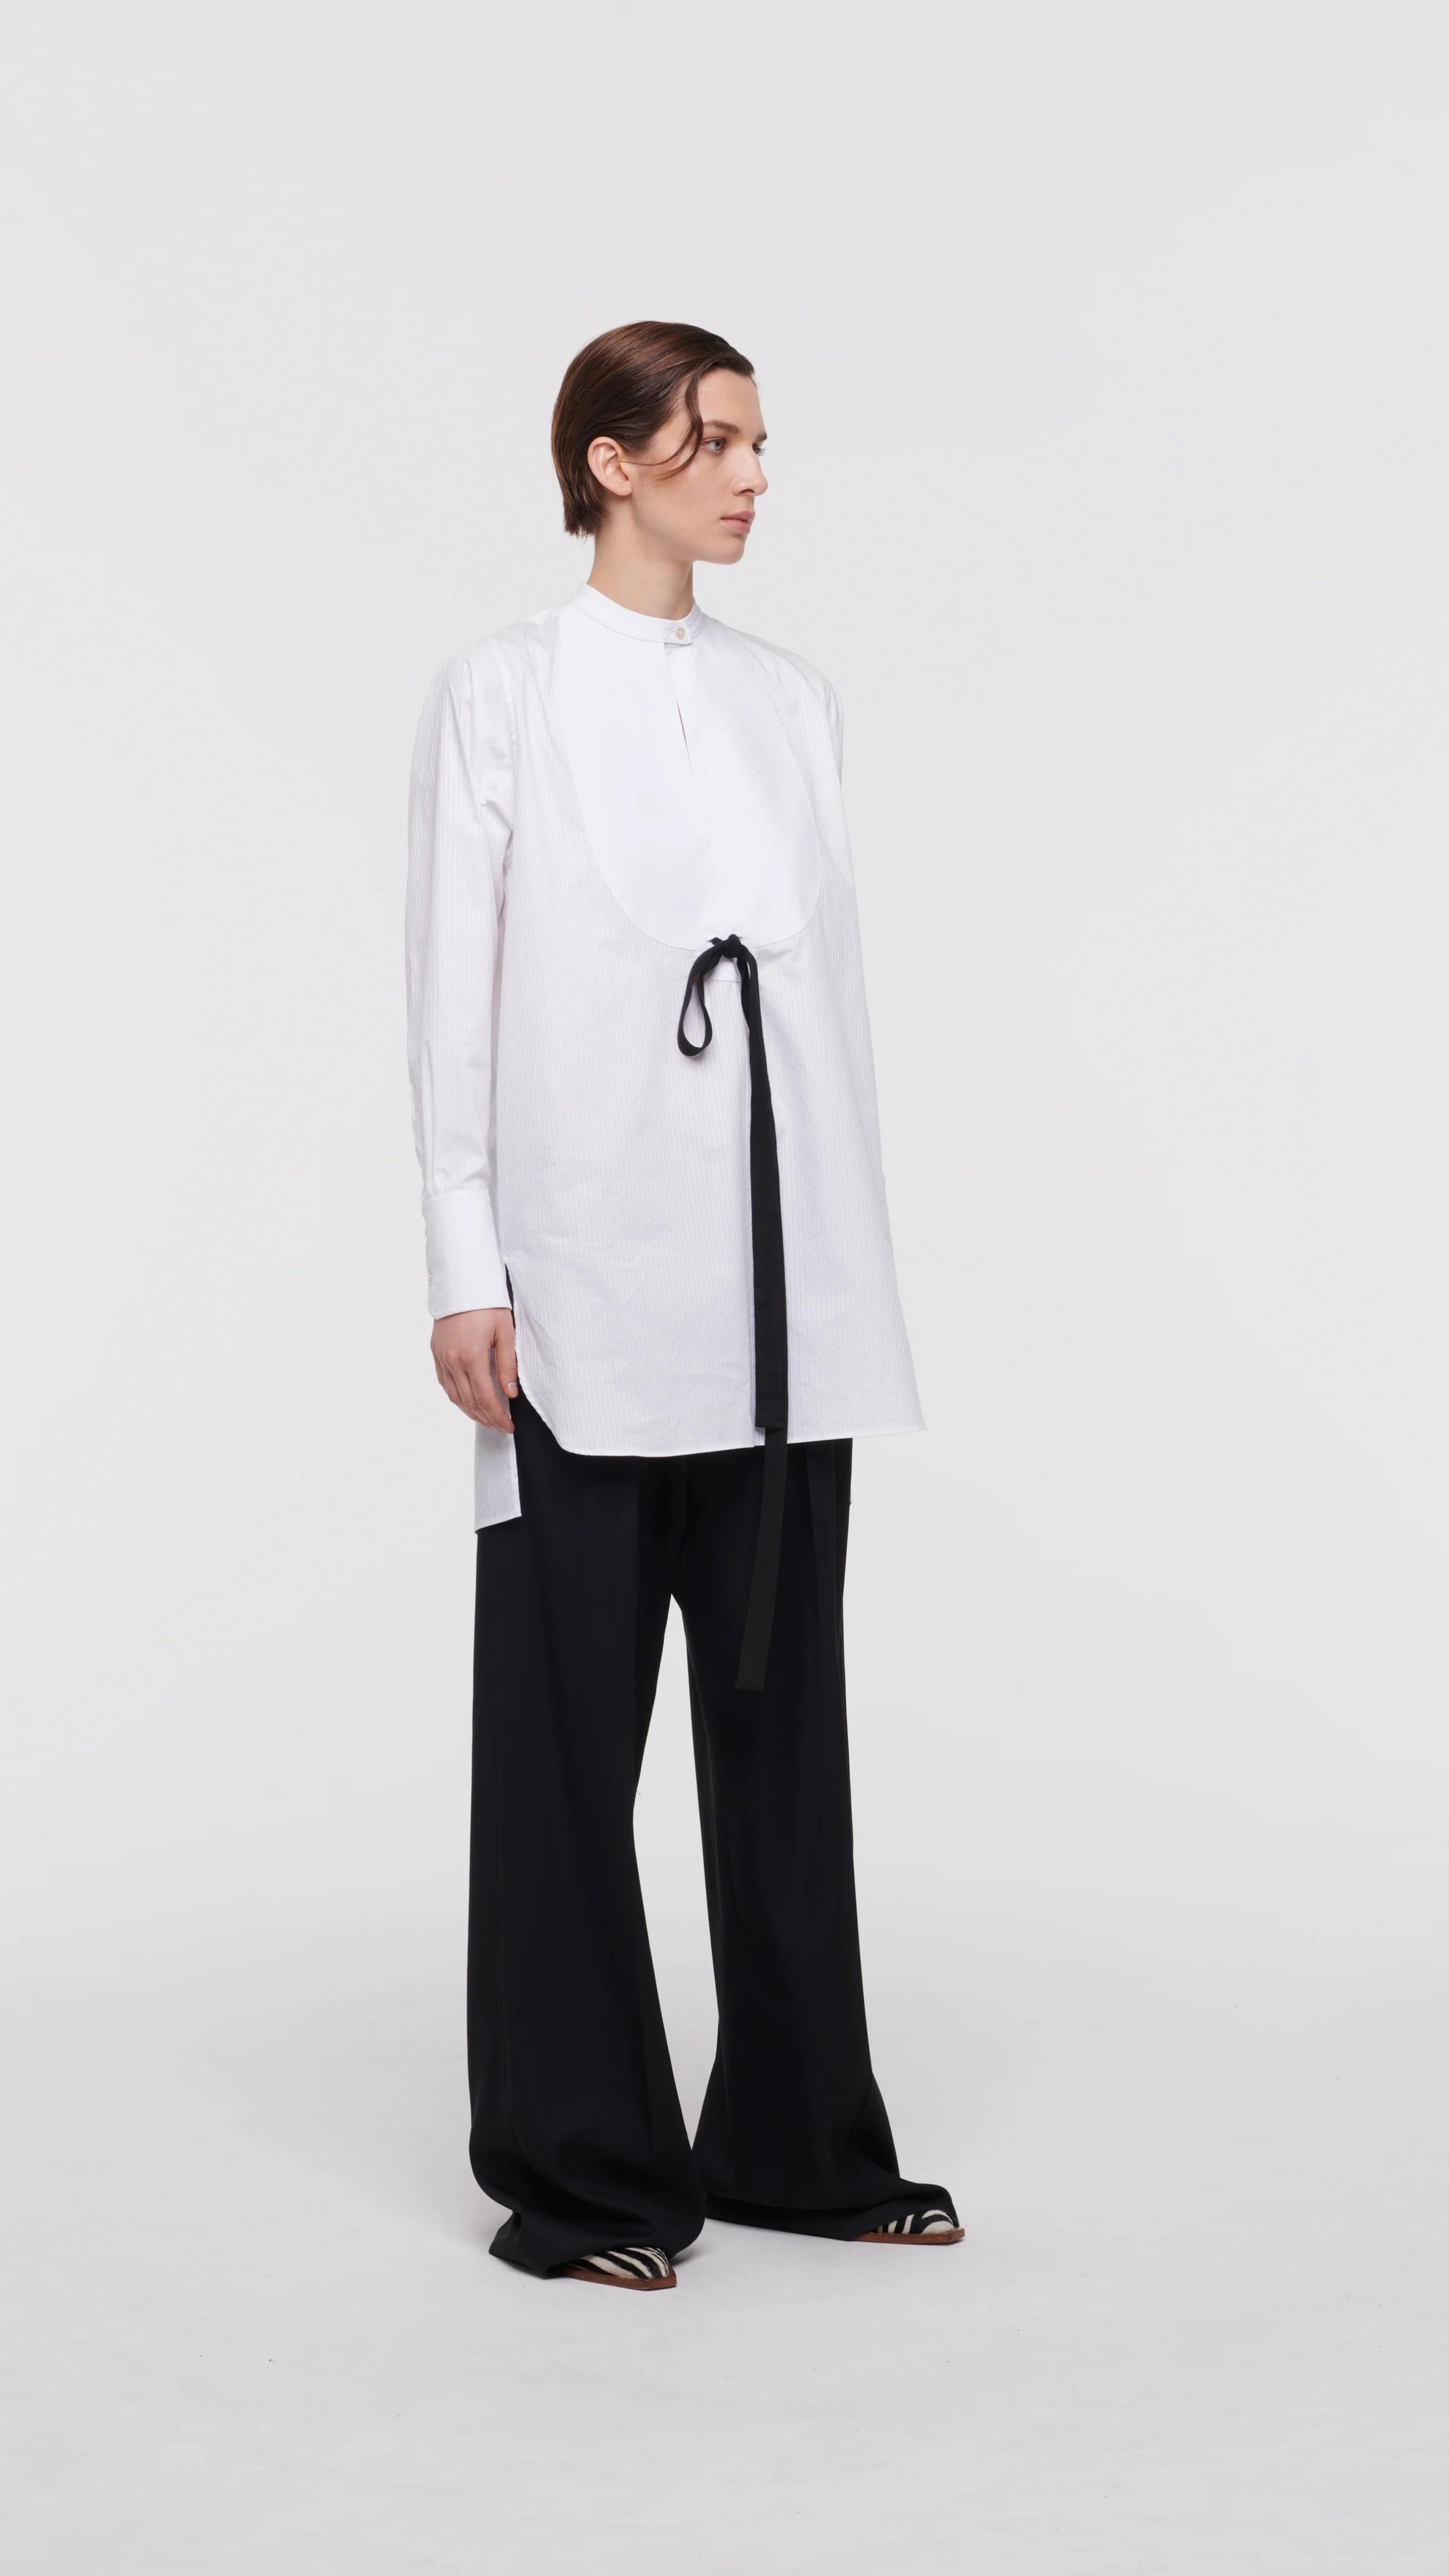 Plan C White Sartorial Poplin Shirt. Classic with a twist long white poplin blouse with front buttons. An added black ribbon detail in the front. Oversized cuffs at the long sleeves. Product photo shown from the side.